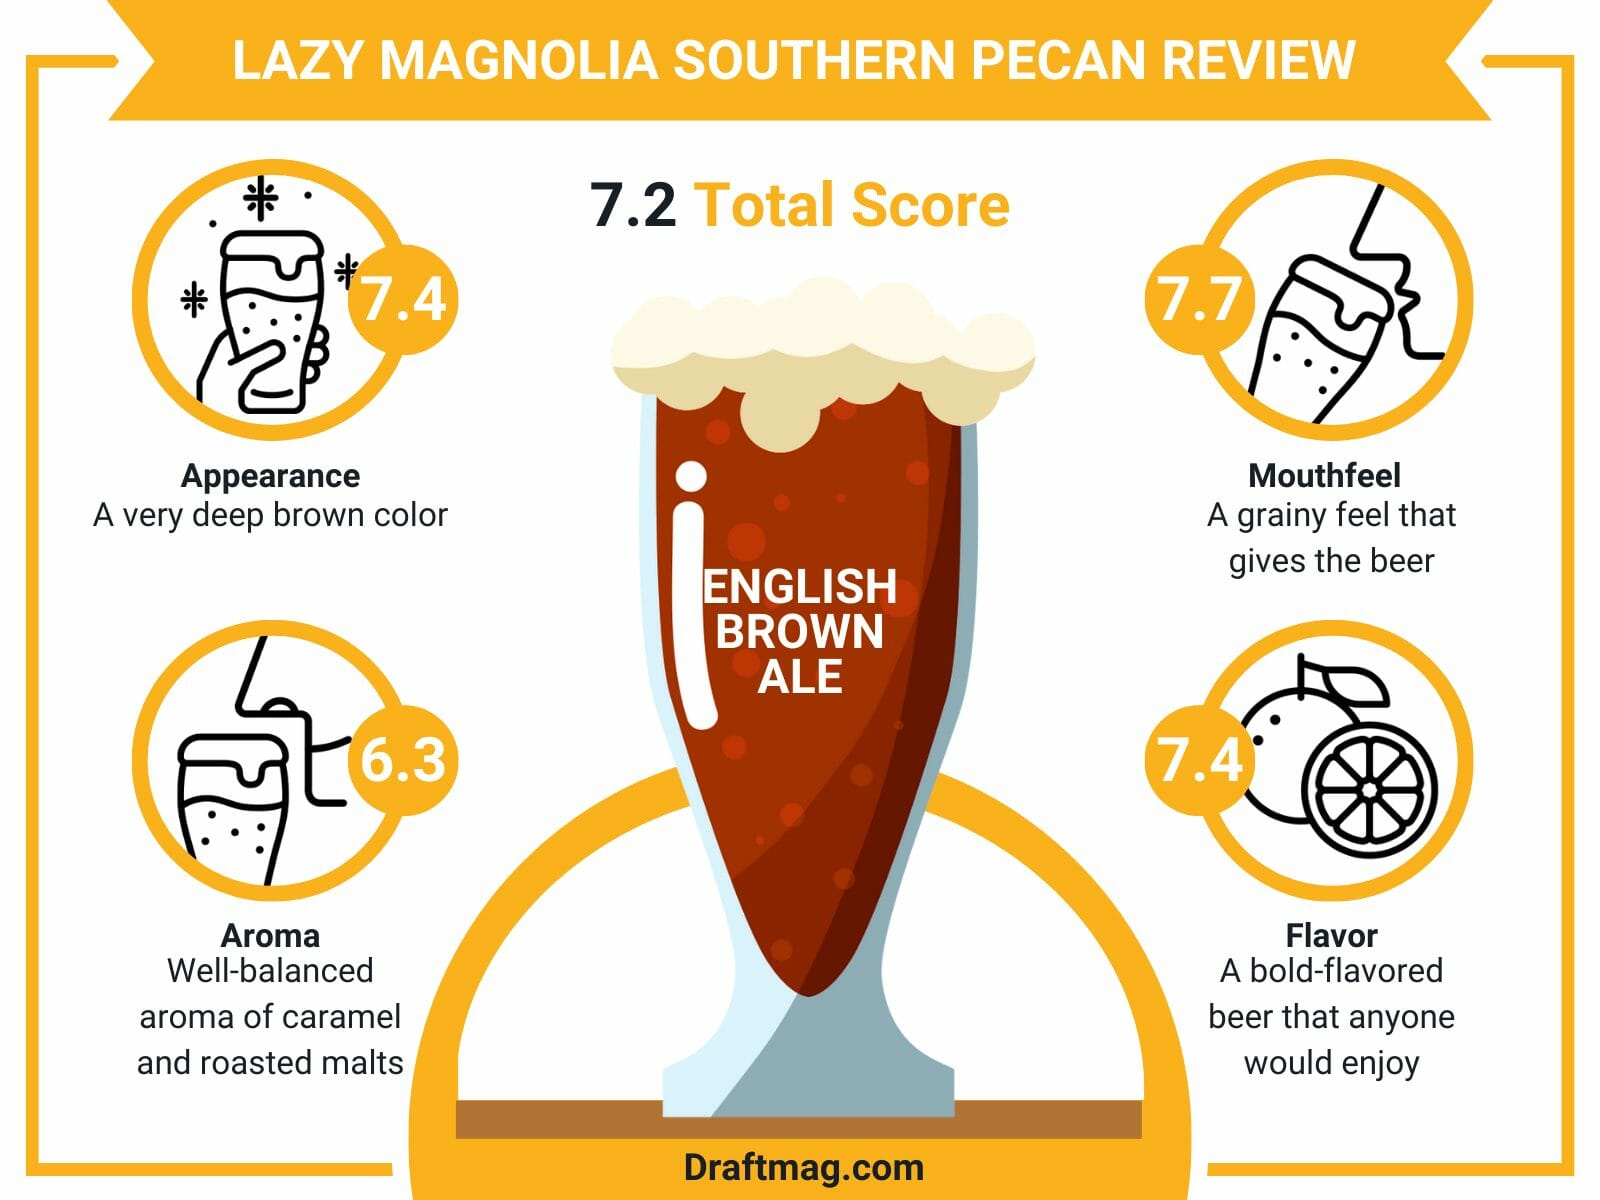 Lazy magnolia southern pecan review infographic